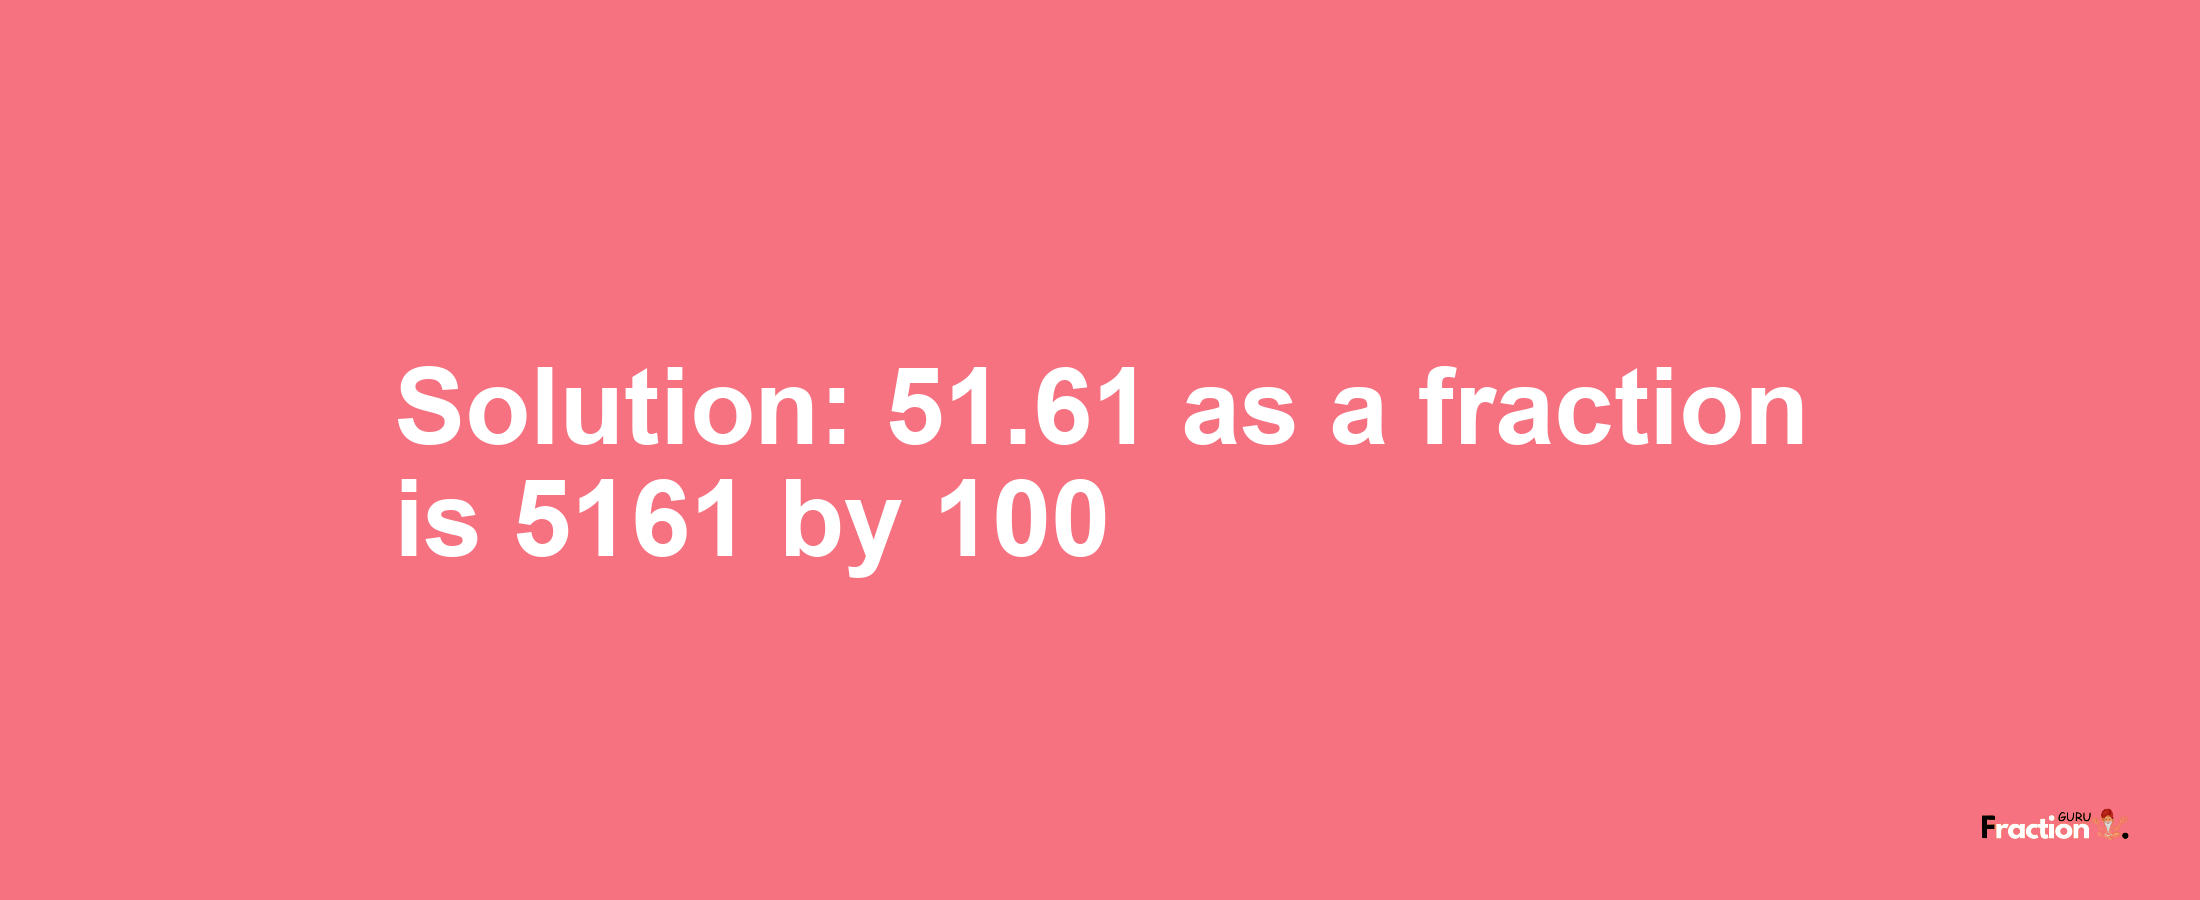 Solution:51.61 as a fraction is 5161/100